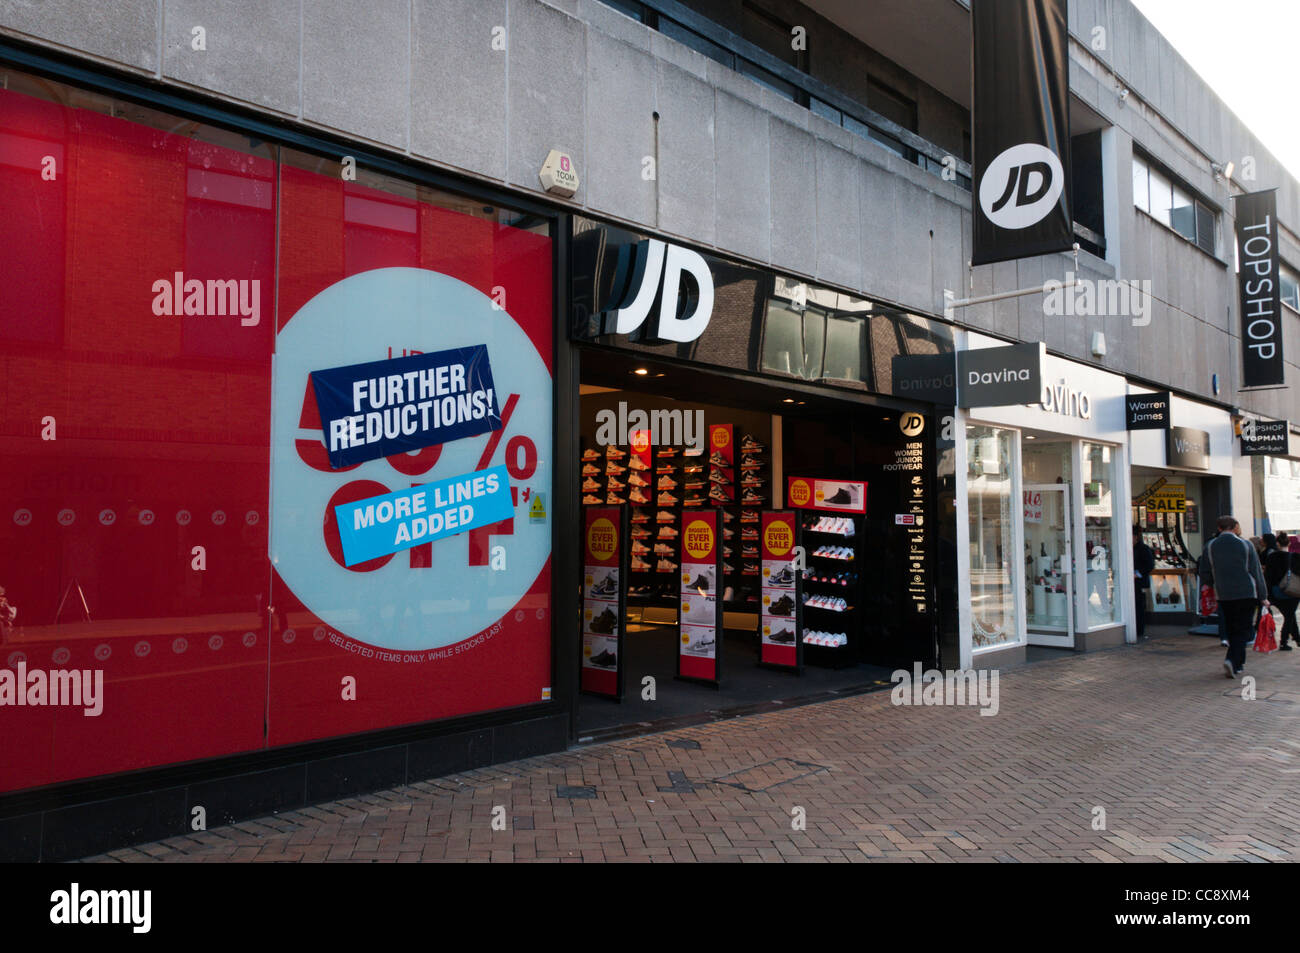 JD Sports shop in High Street, Bromley, Kent, England Stock Photo